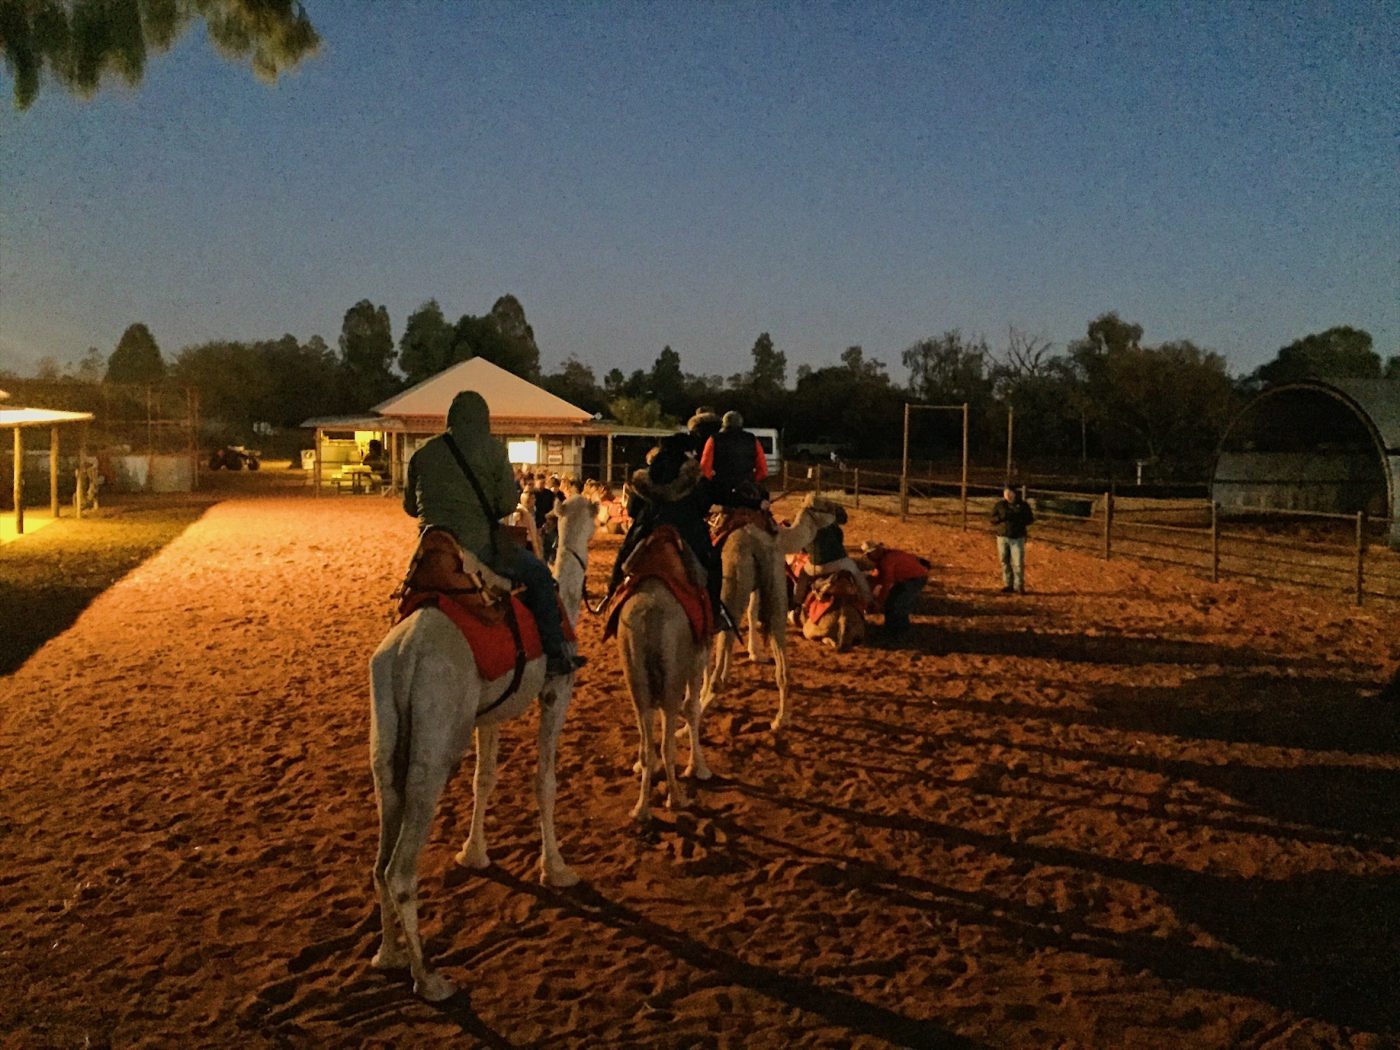 Riding the camel to sunrise route